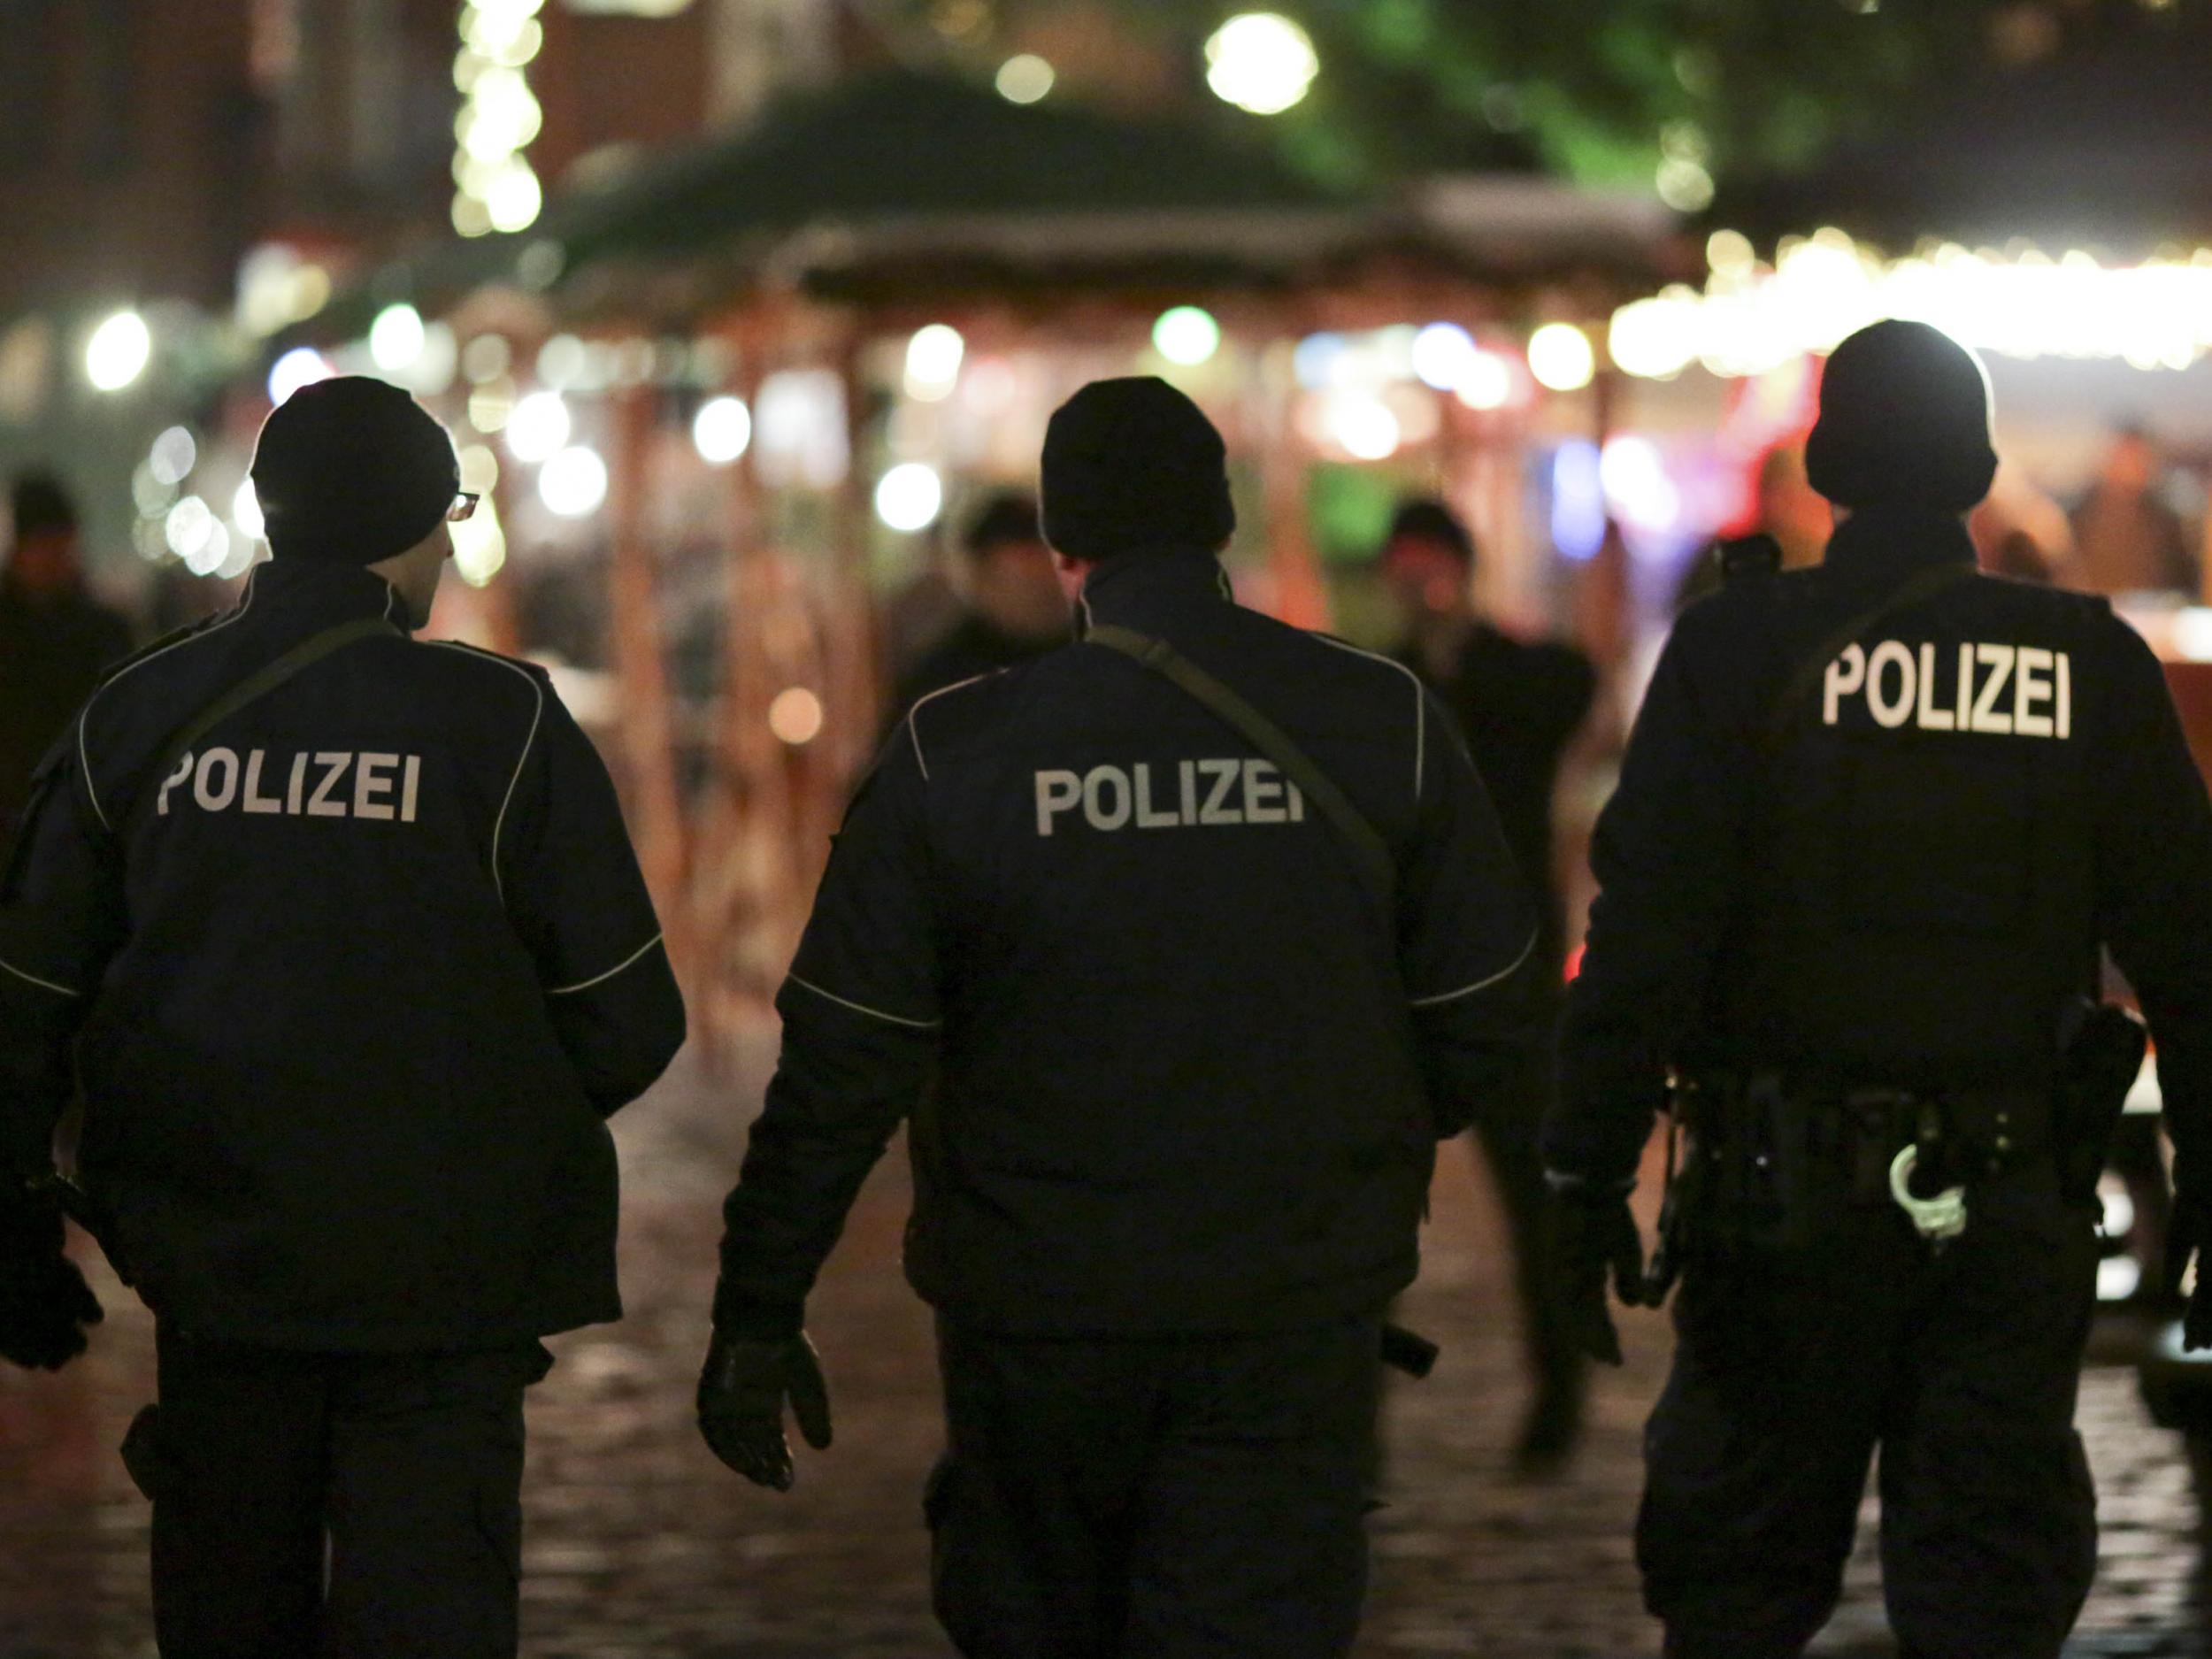 German police presence has been increased since an attack on a Christmas market that killed 12 people